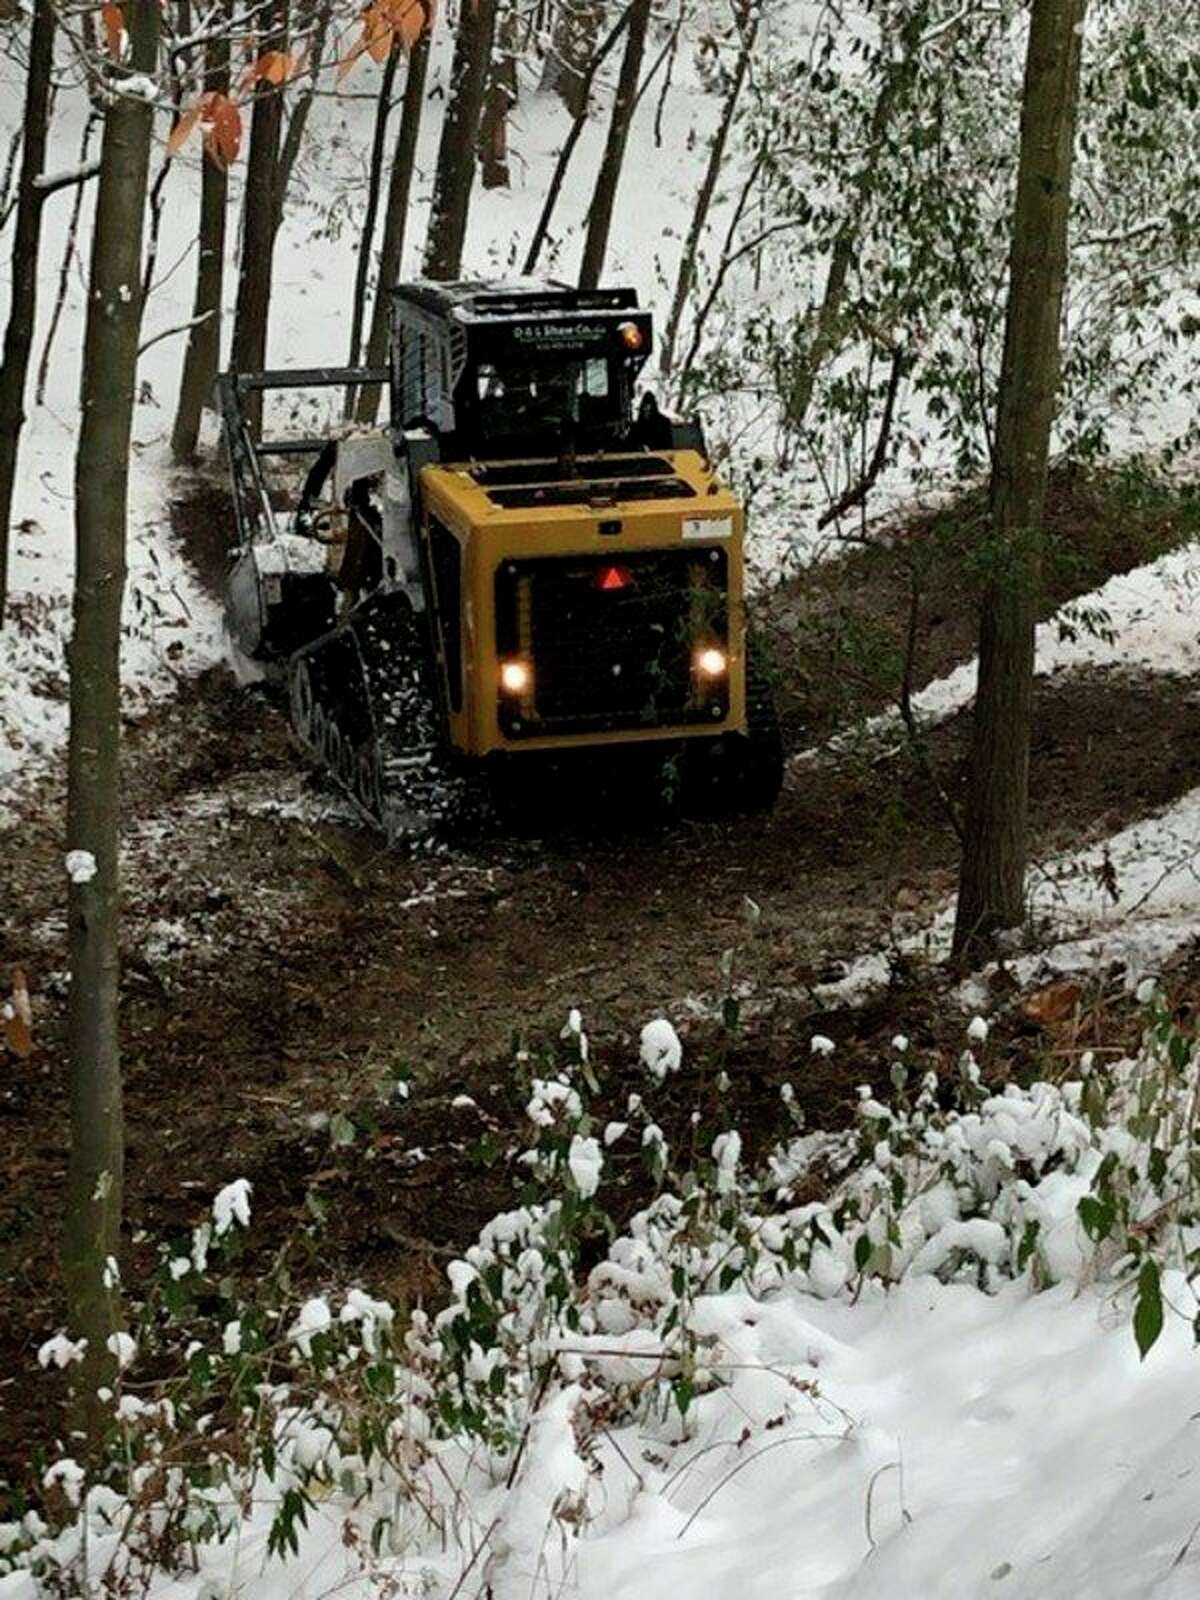 Heavy equipment was required to stop the spread of invasive vegetation at Magoon Creek Park. (Courtesy Photo)